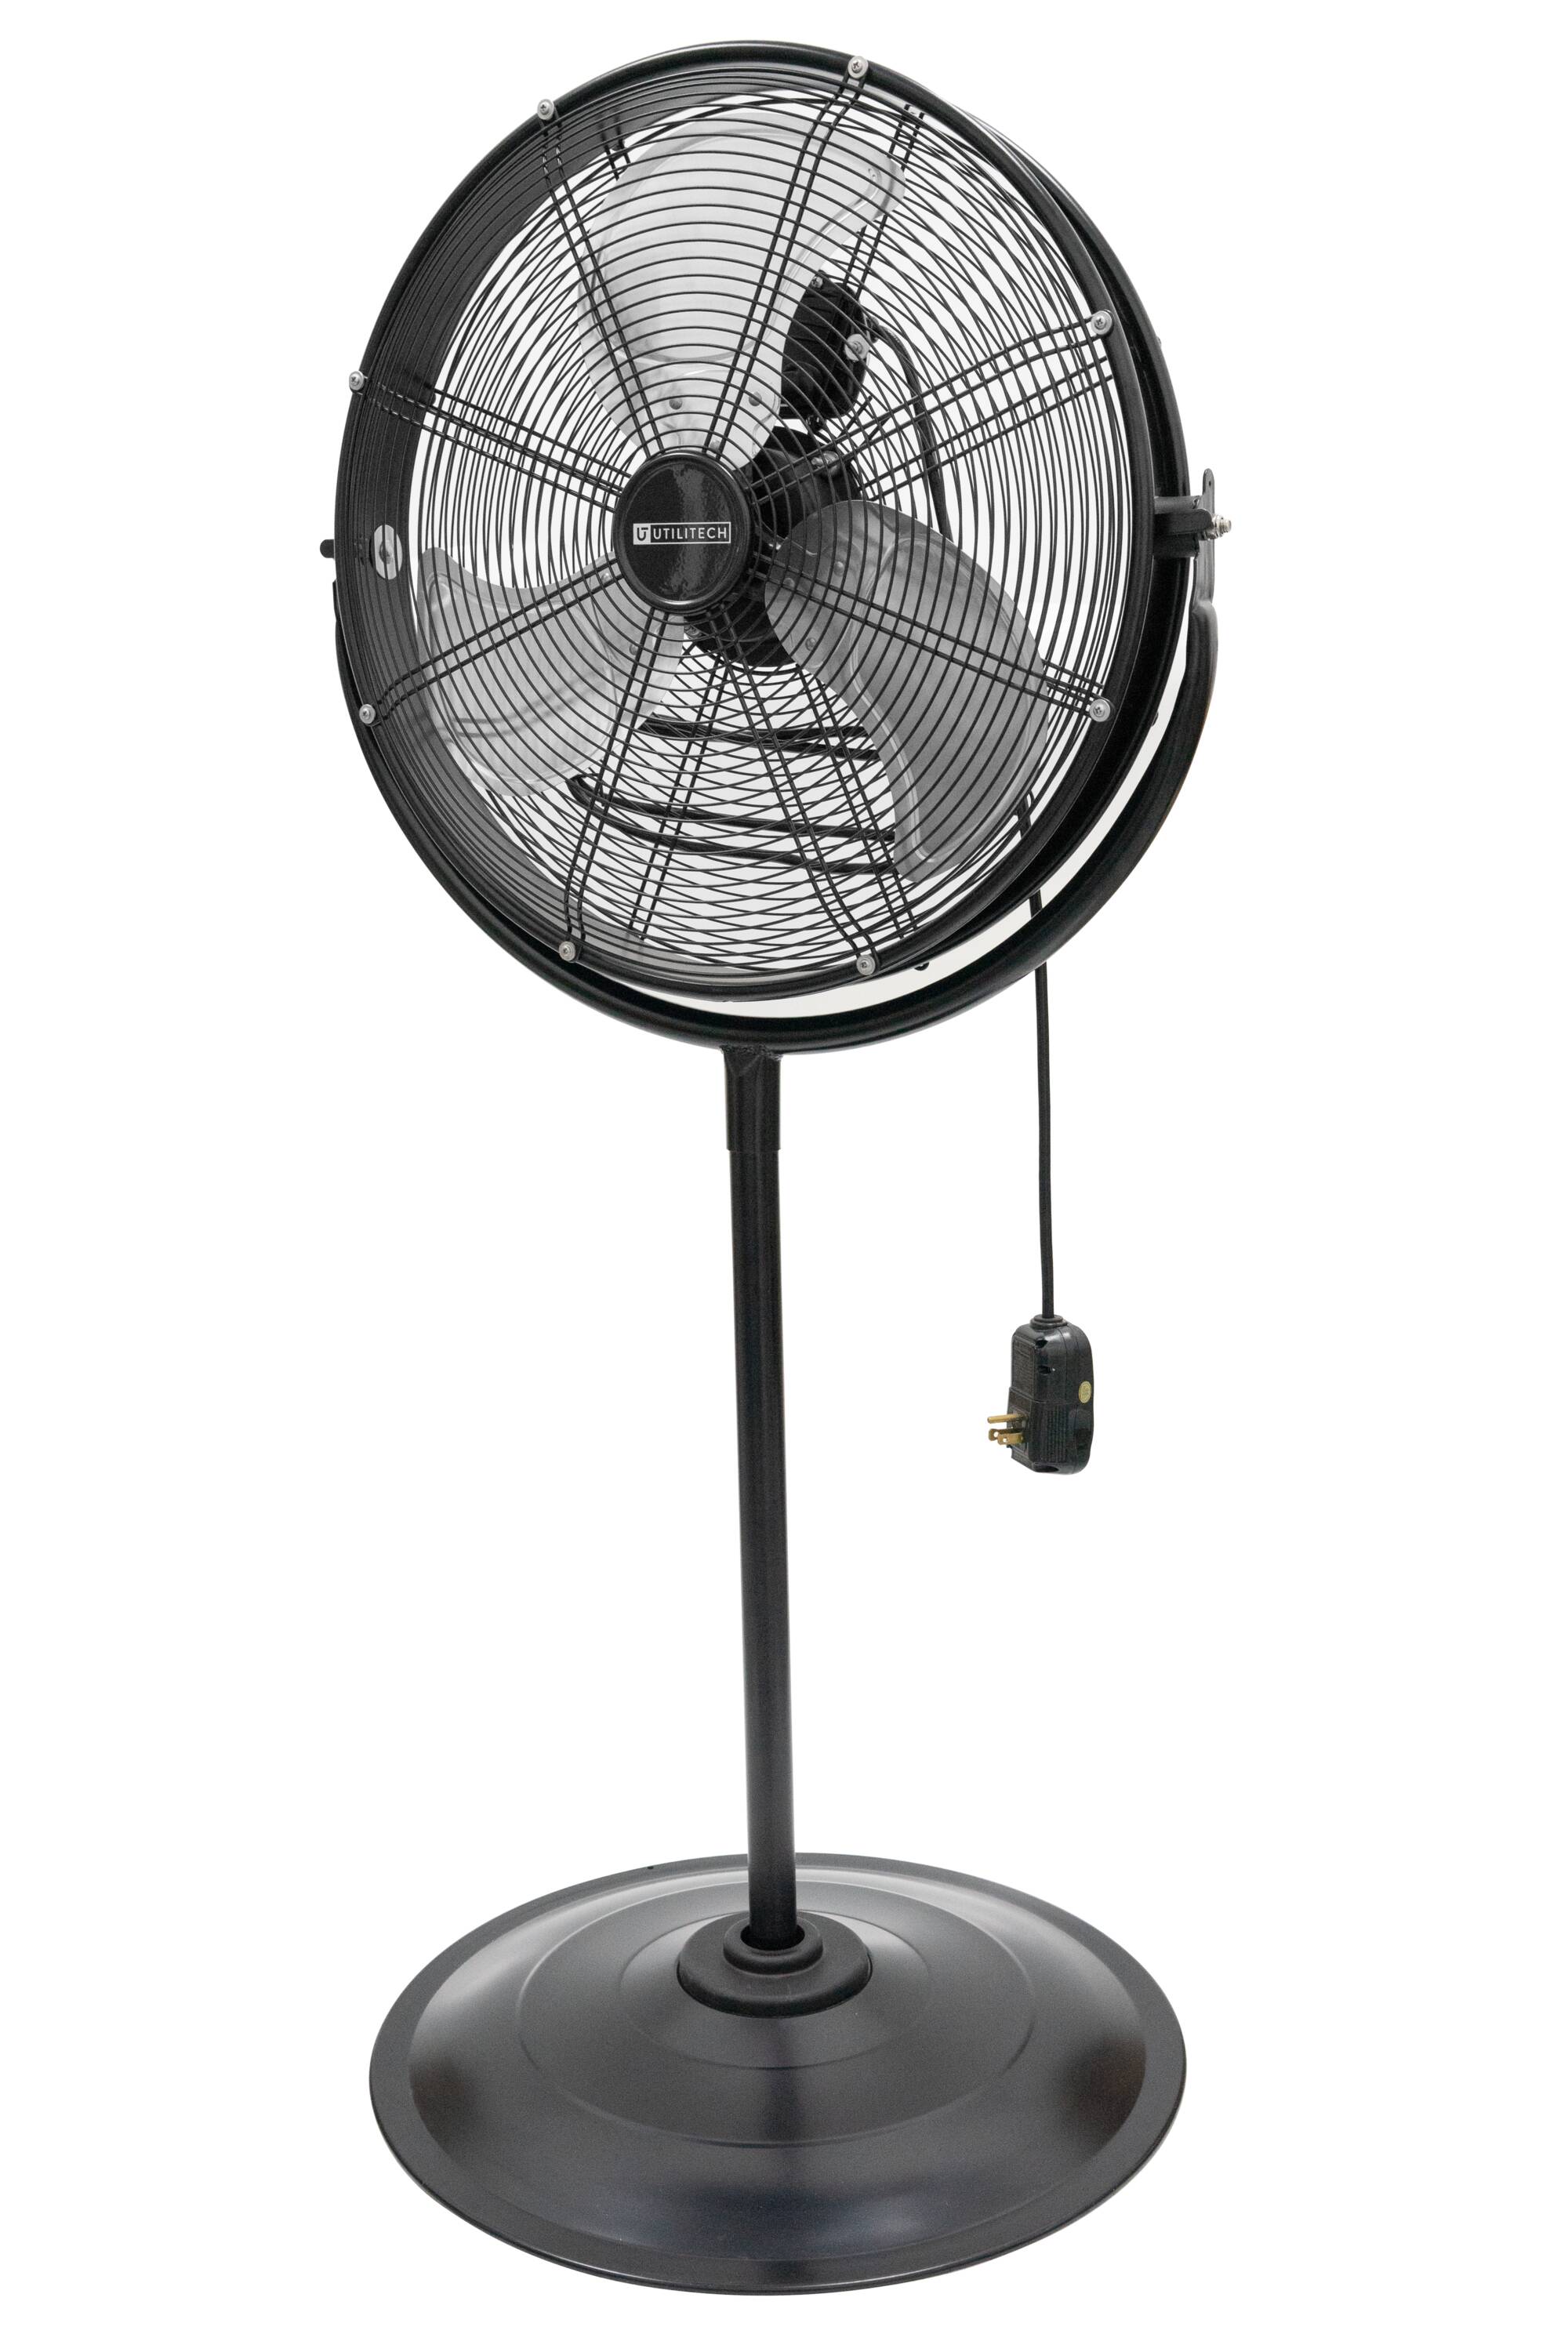 Utilitech 20-in 3-Speed Indoor or Outdoor Black Pedestal Fan in Portable Fans at Lowes.com